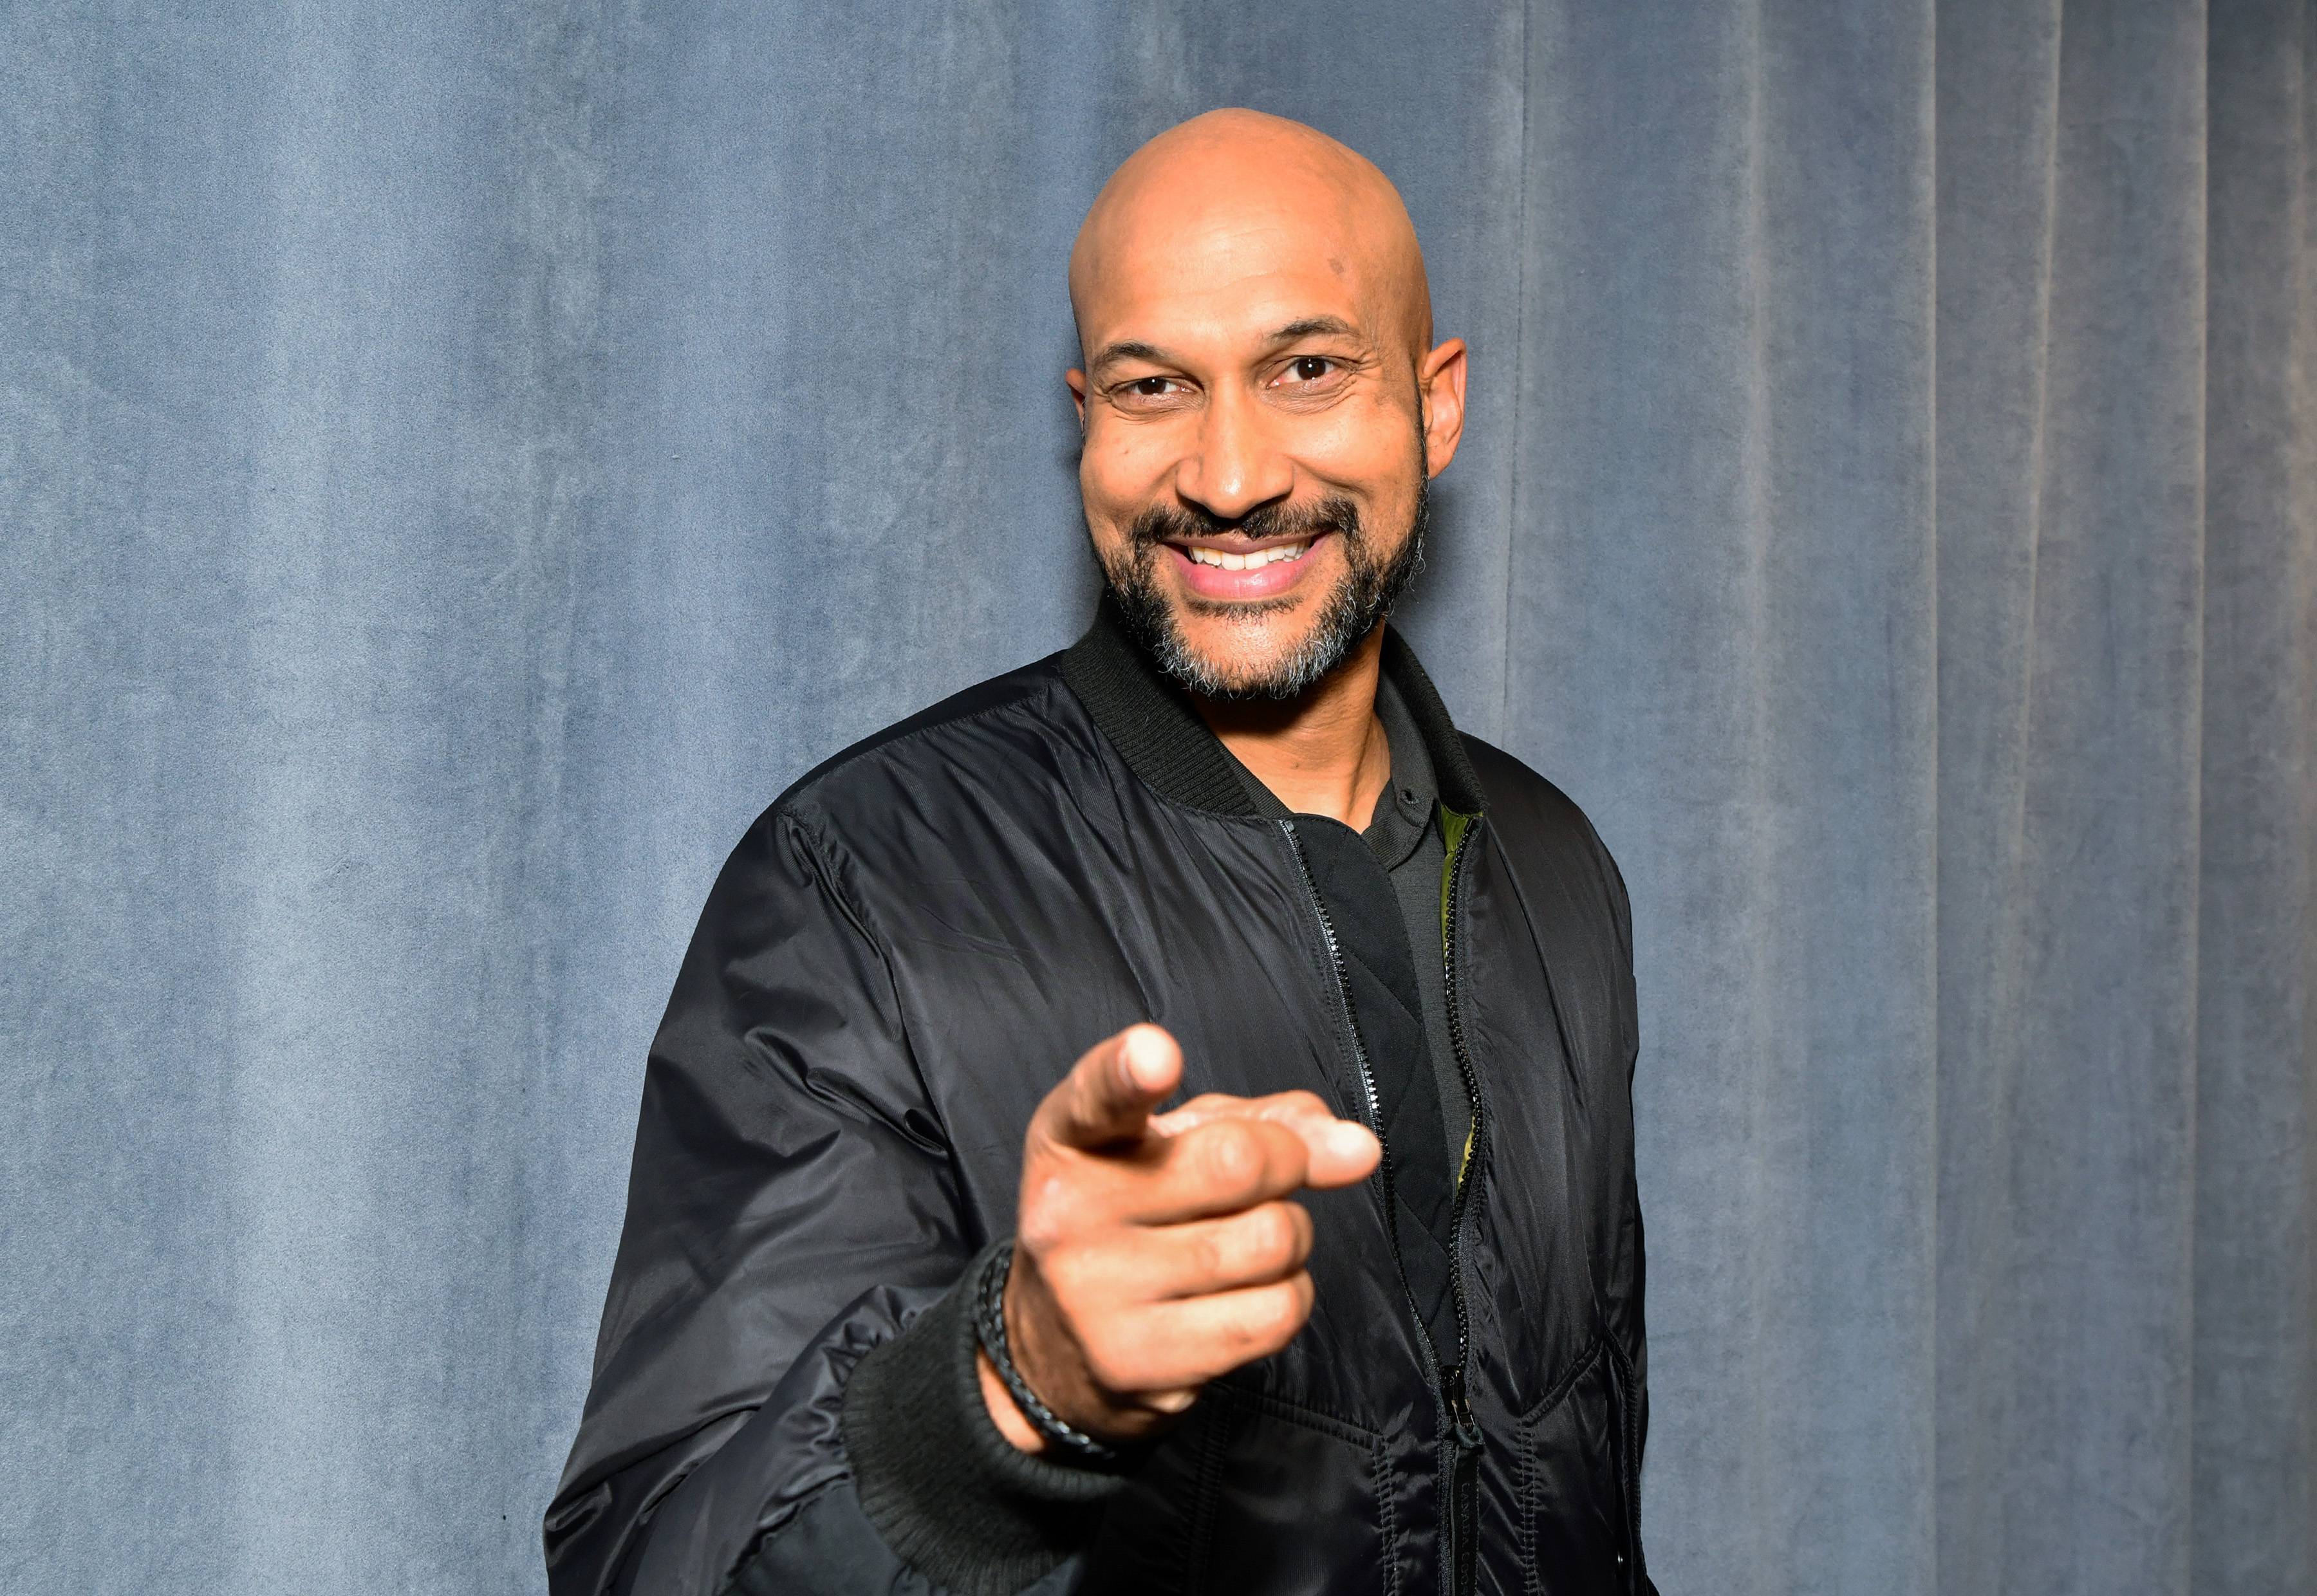 NEW YORK, NEW YORK - OCTOBER 25: (EXCLUSIVE COVERAGE) Actor Keegan-Michael Key visits SiriusXM Studios on October 25, 2019 in New York City. (Photo by Slaven Vlasic/Getty Images)